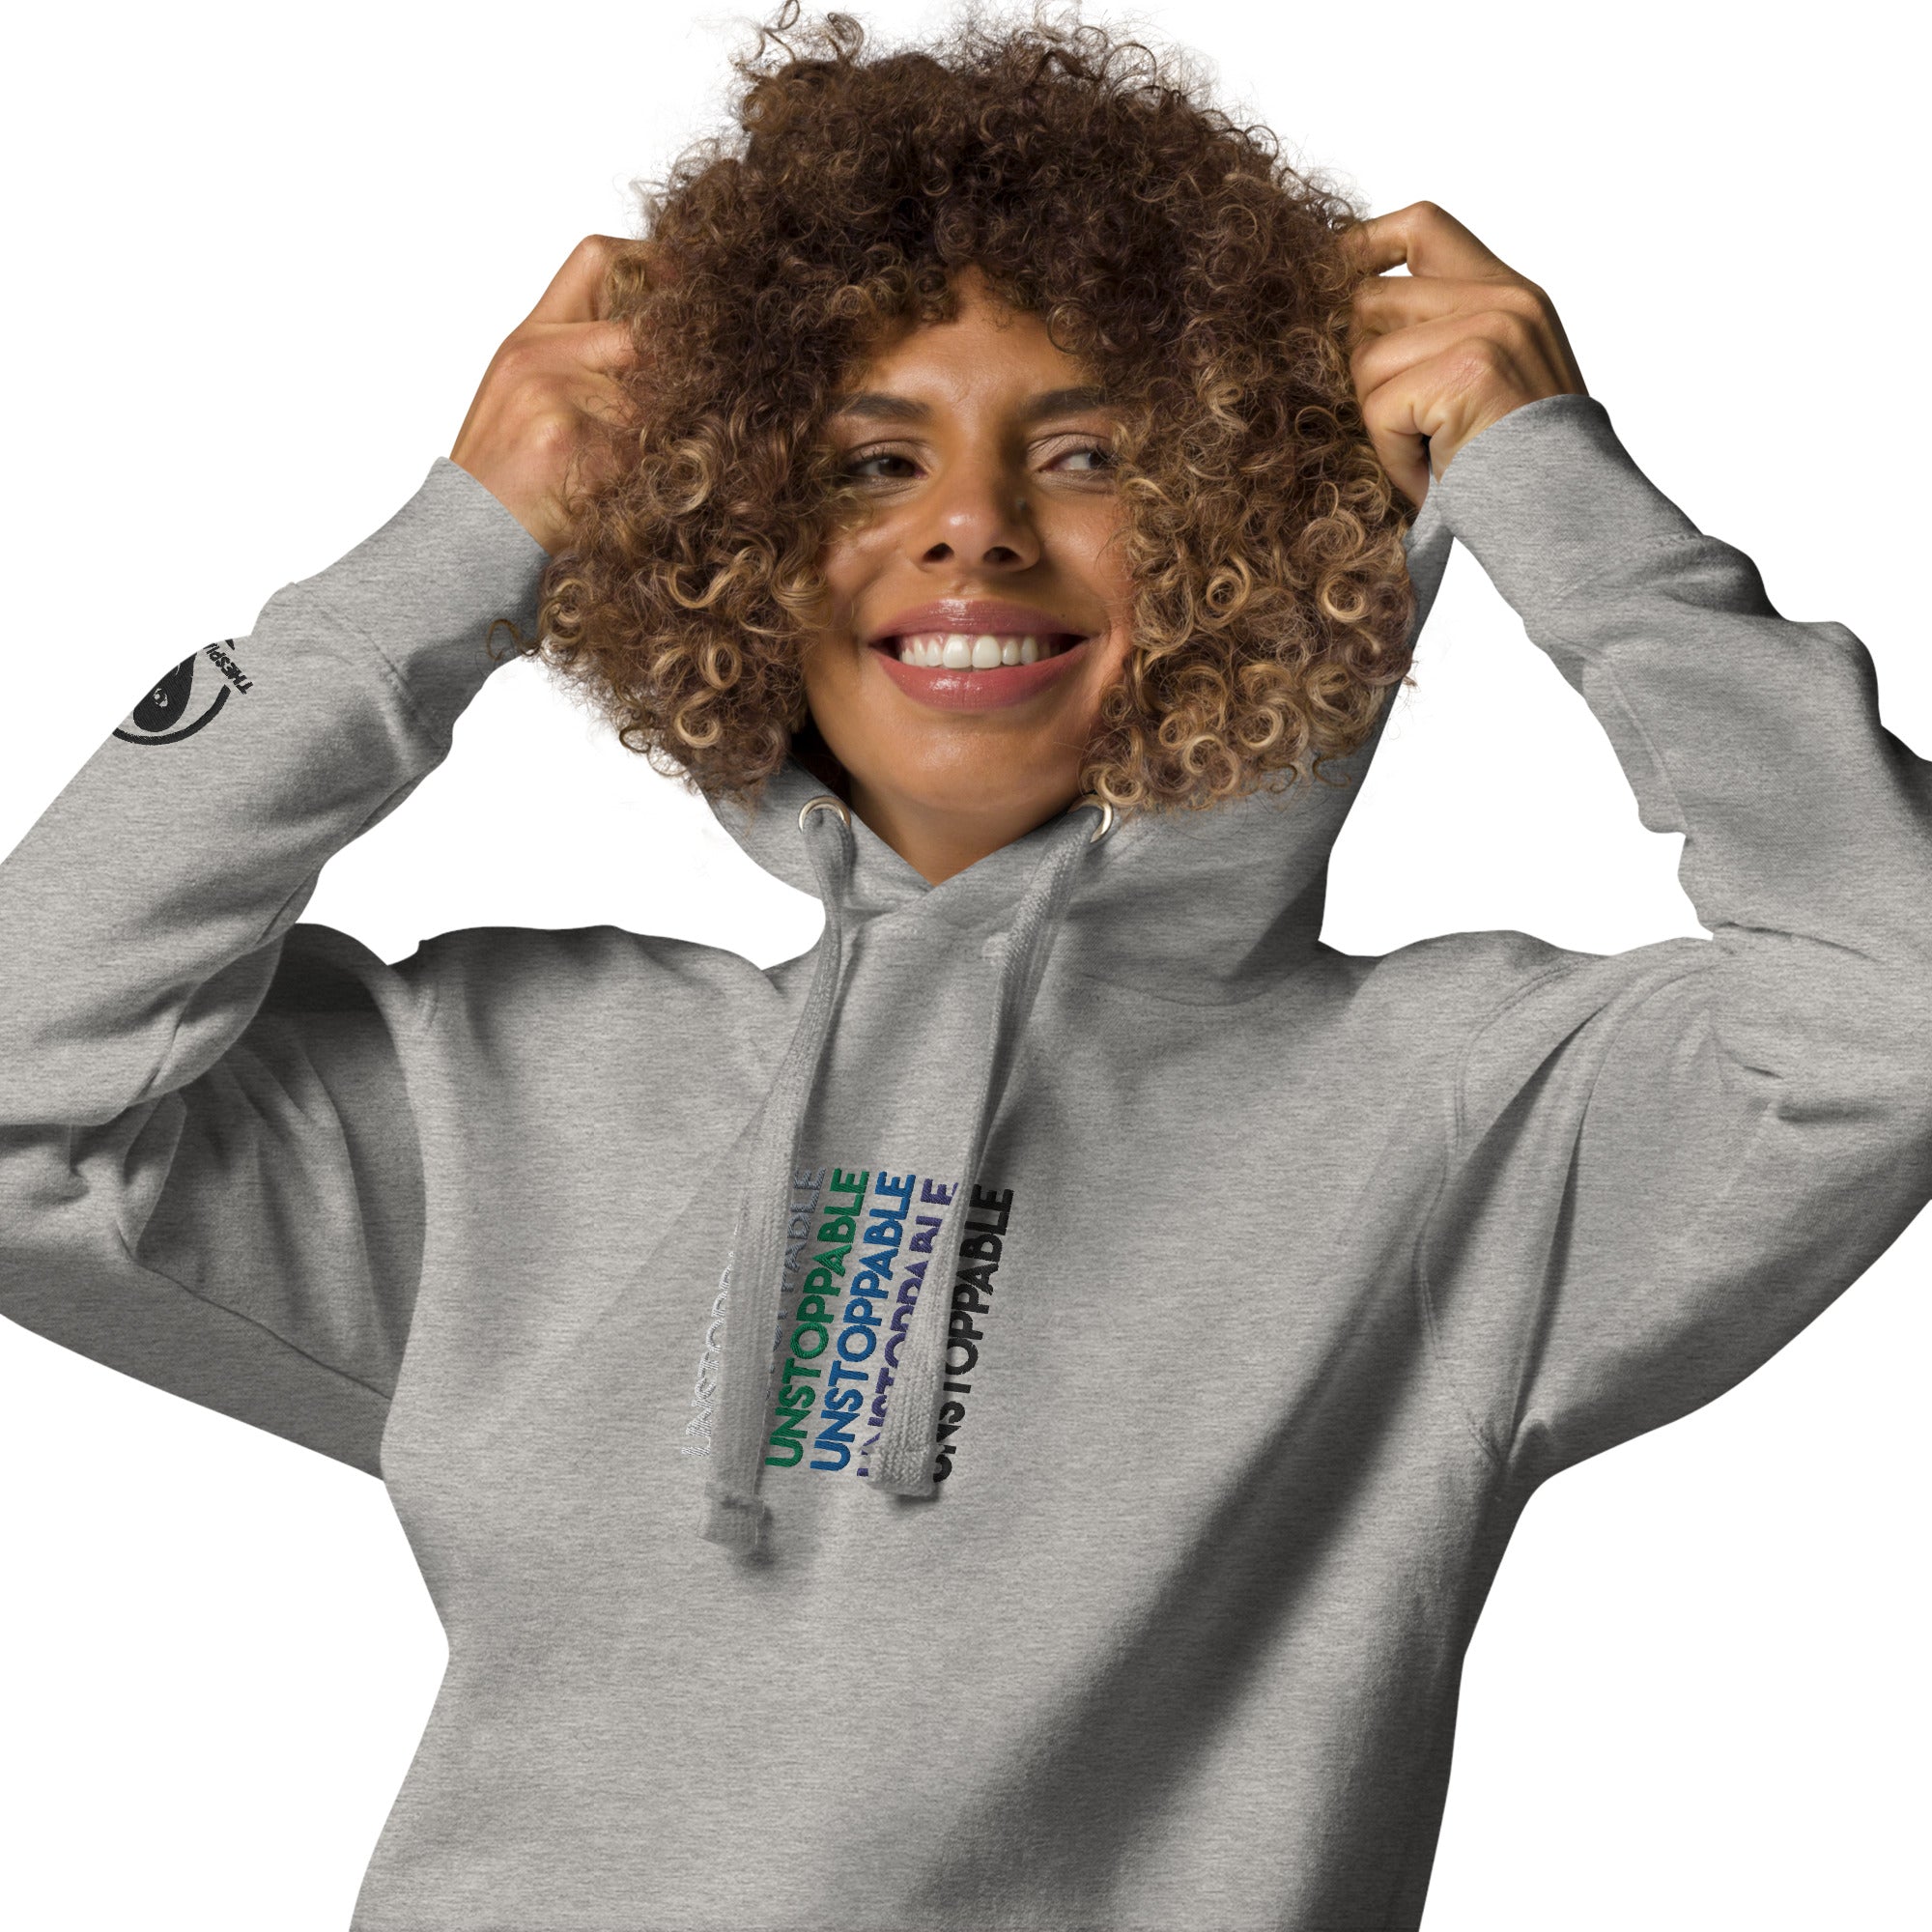 Unstoppable - Colorful Embroidered Premium Unisex Hoodie